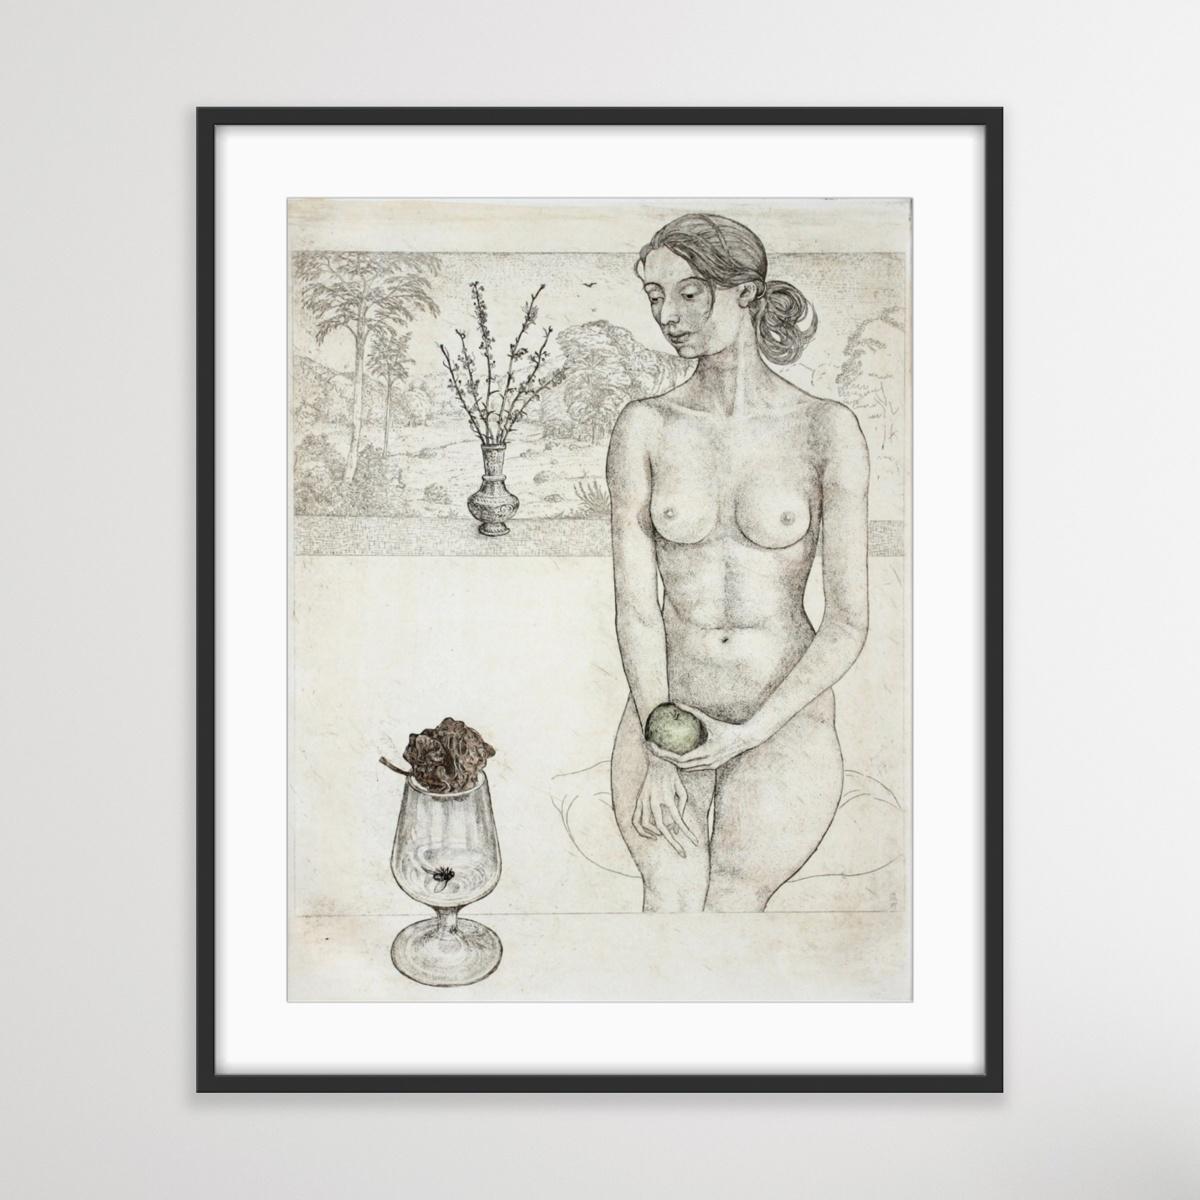 Two apples - XX Century Figurative Etching Print, Nude, Landscape - Beige Abstract Print by Leszek Rózga